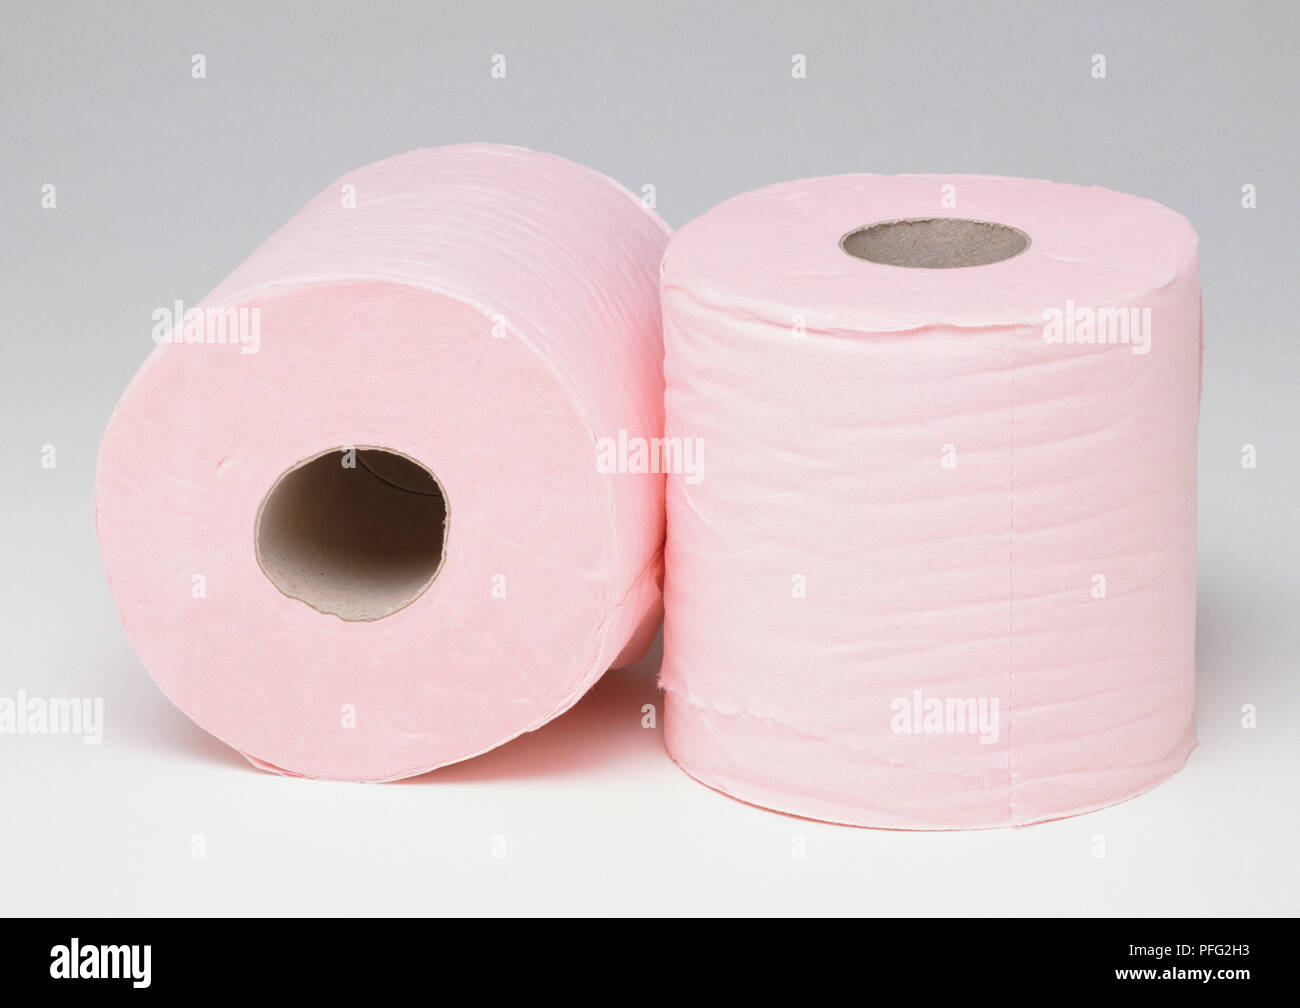 File:Pink Toilet Paper.jpg - Wikimedia Commons